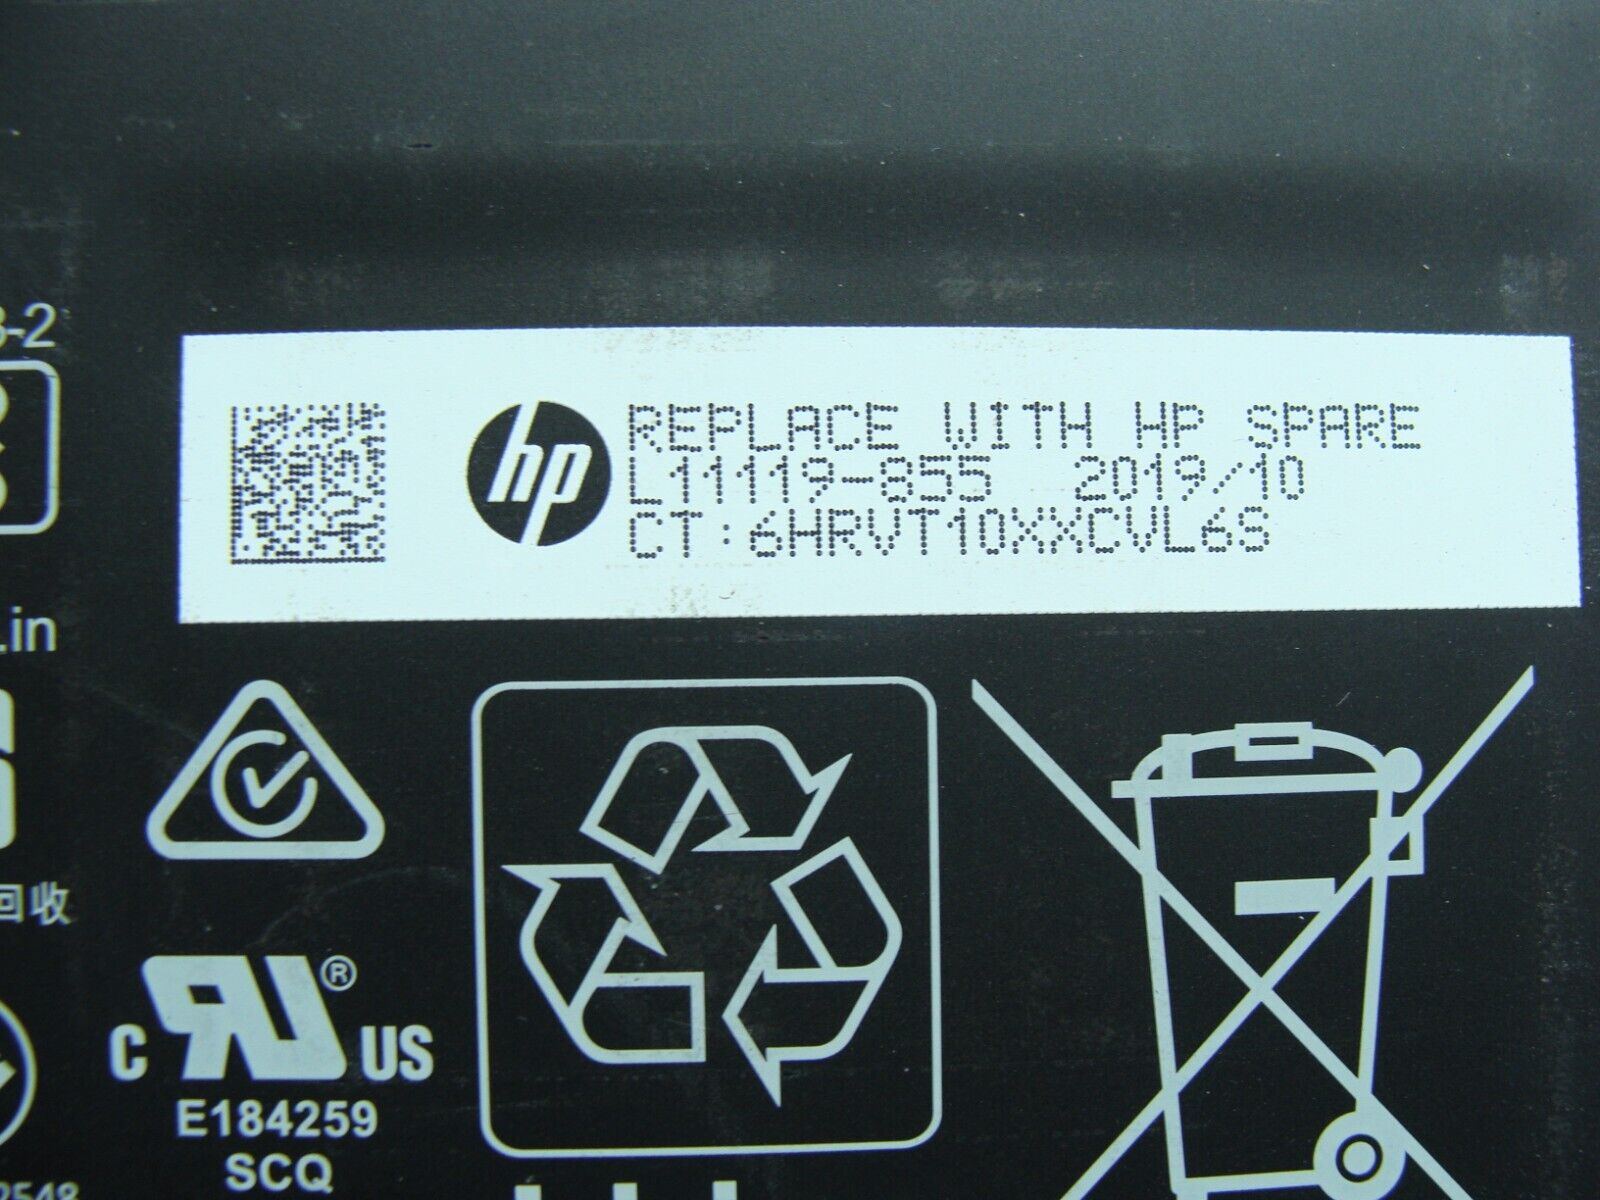 HP 14-dq1033cl 14